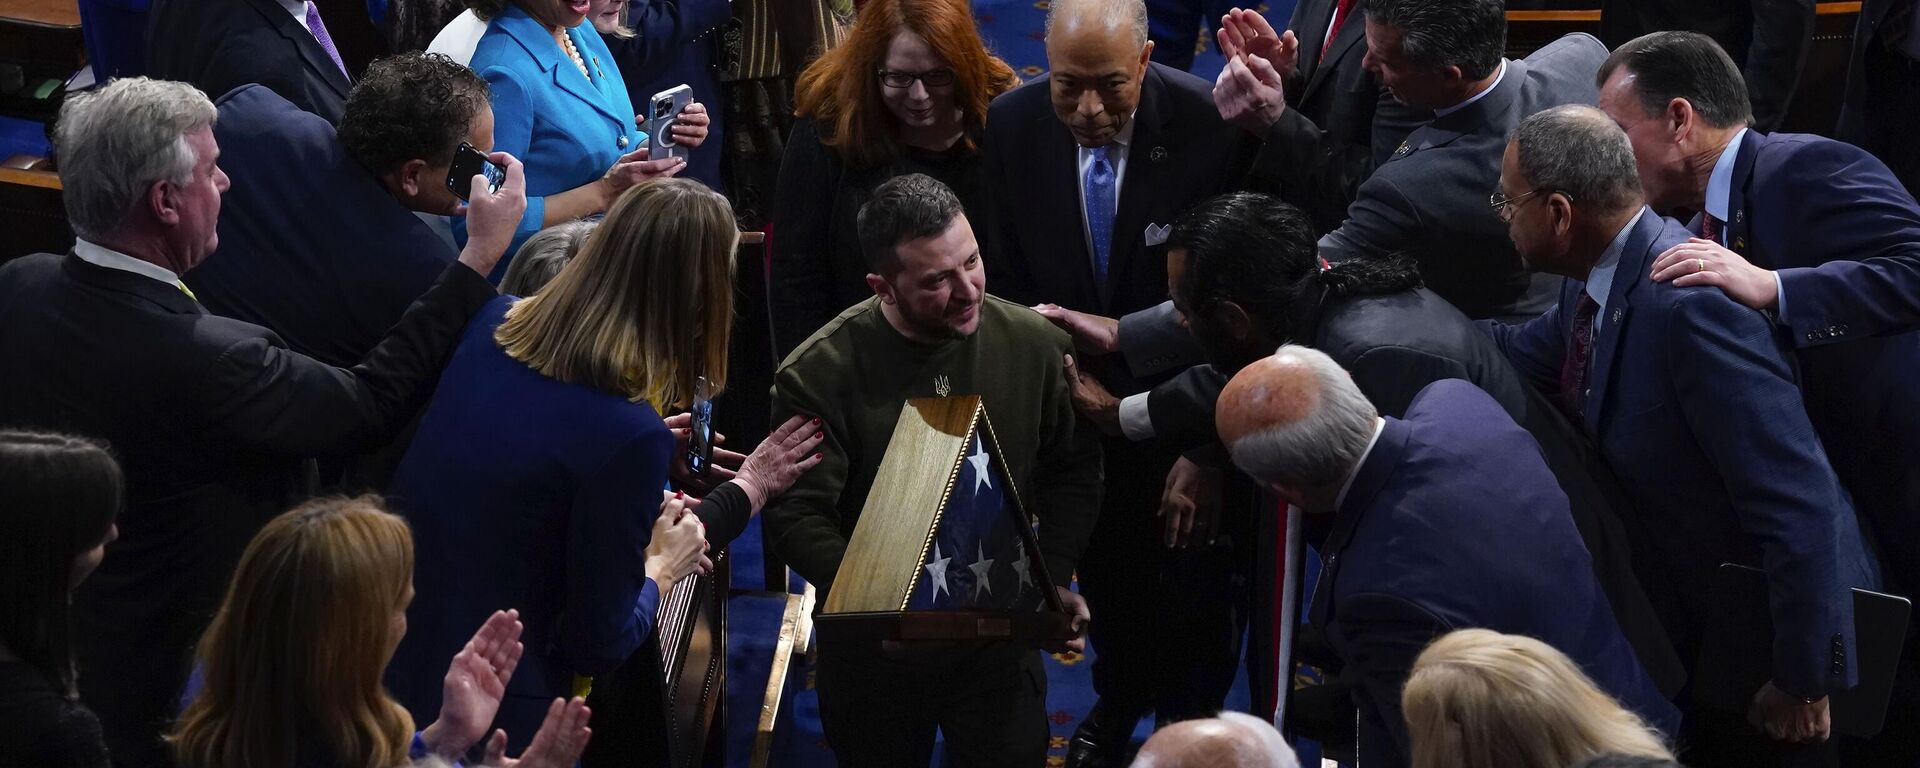 Ukrainian President Volodymyr Zelenskyy holds an American flag that was gifted to him by House Speaker Nancy Pelosi of Calif., as he leaves after addressing a joint meeting of Congress on Capitol Hill in Washington, Wednesday, Dec. 21, 2022. - Sputnik International, 1920, 23.12.2022